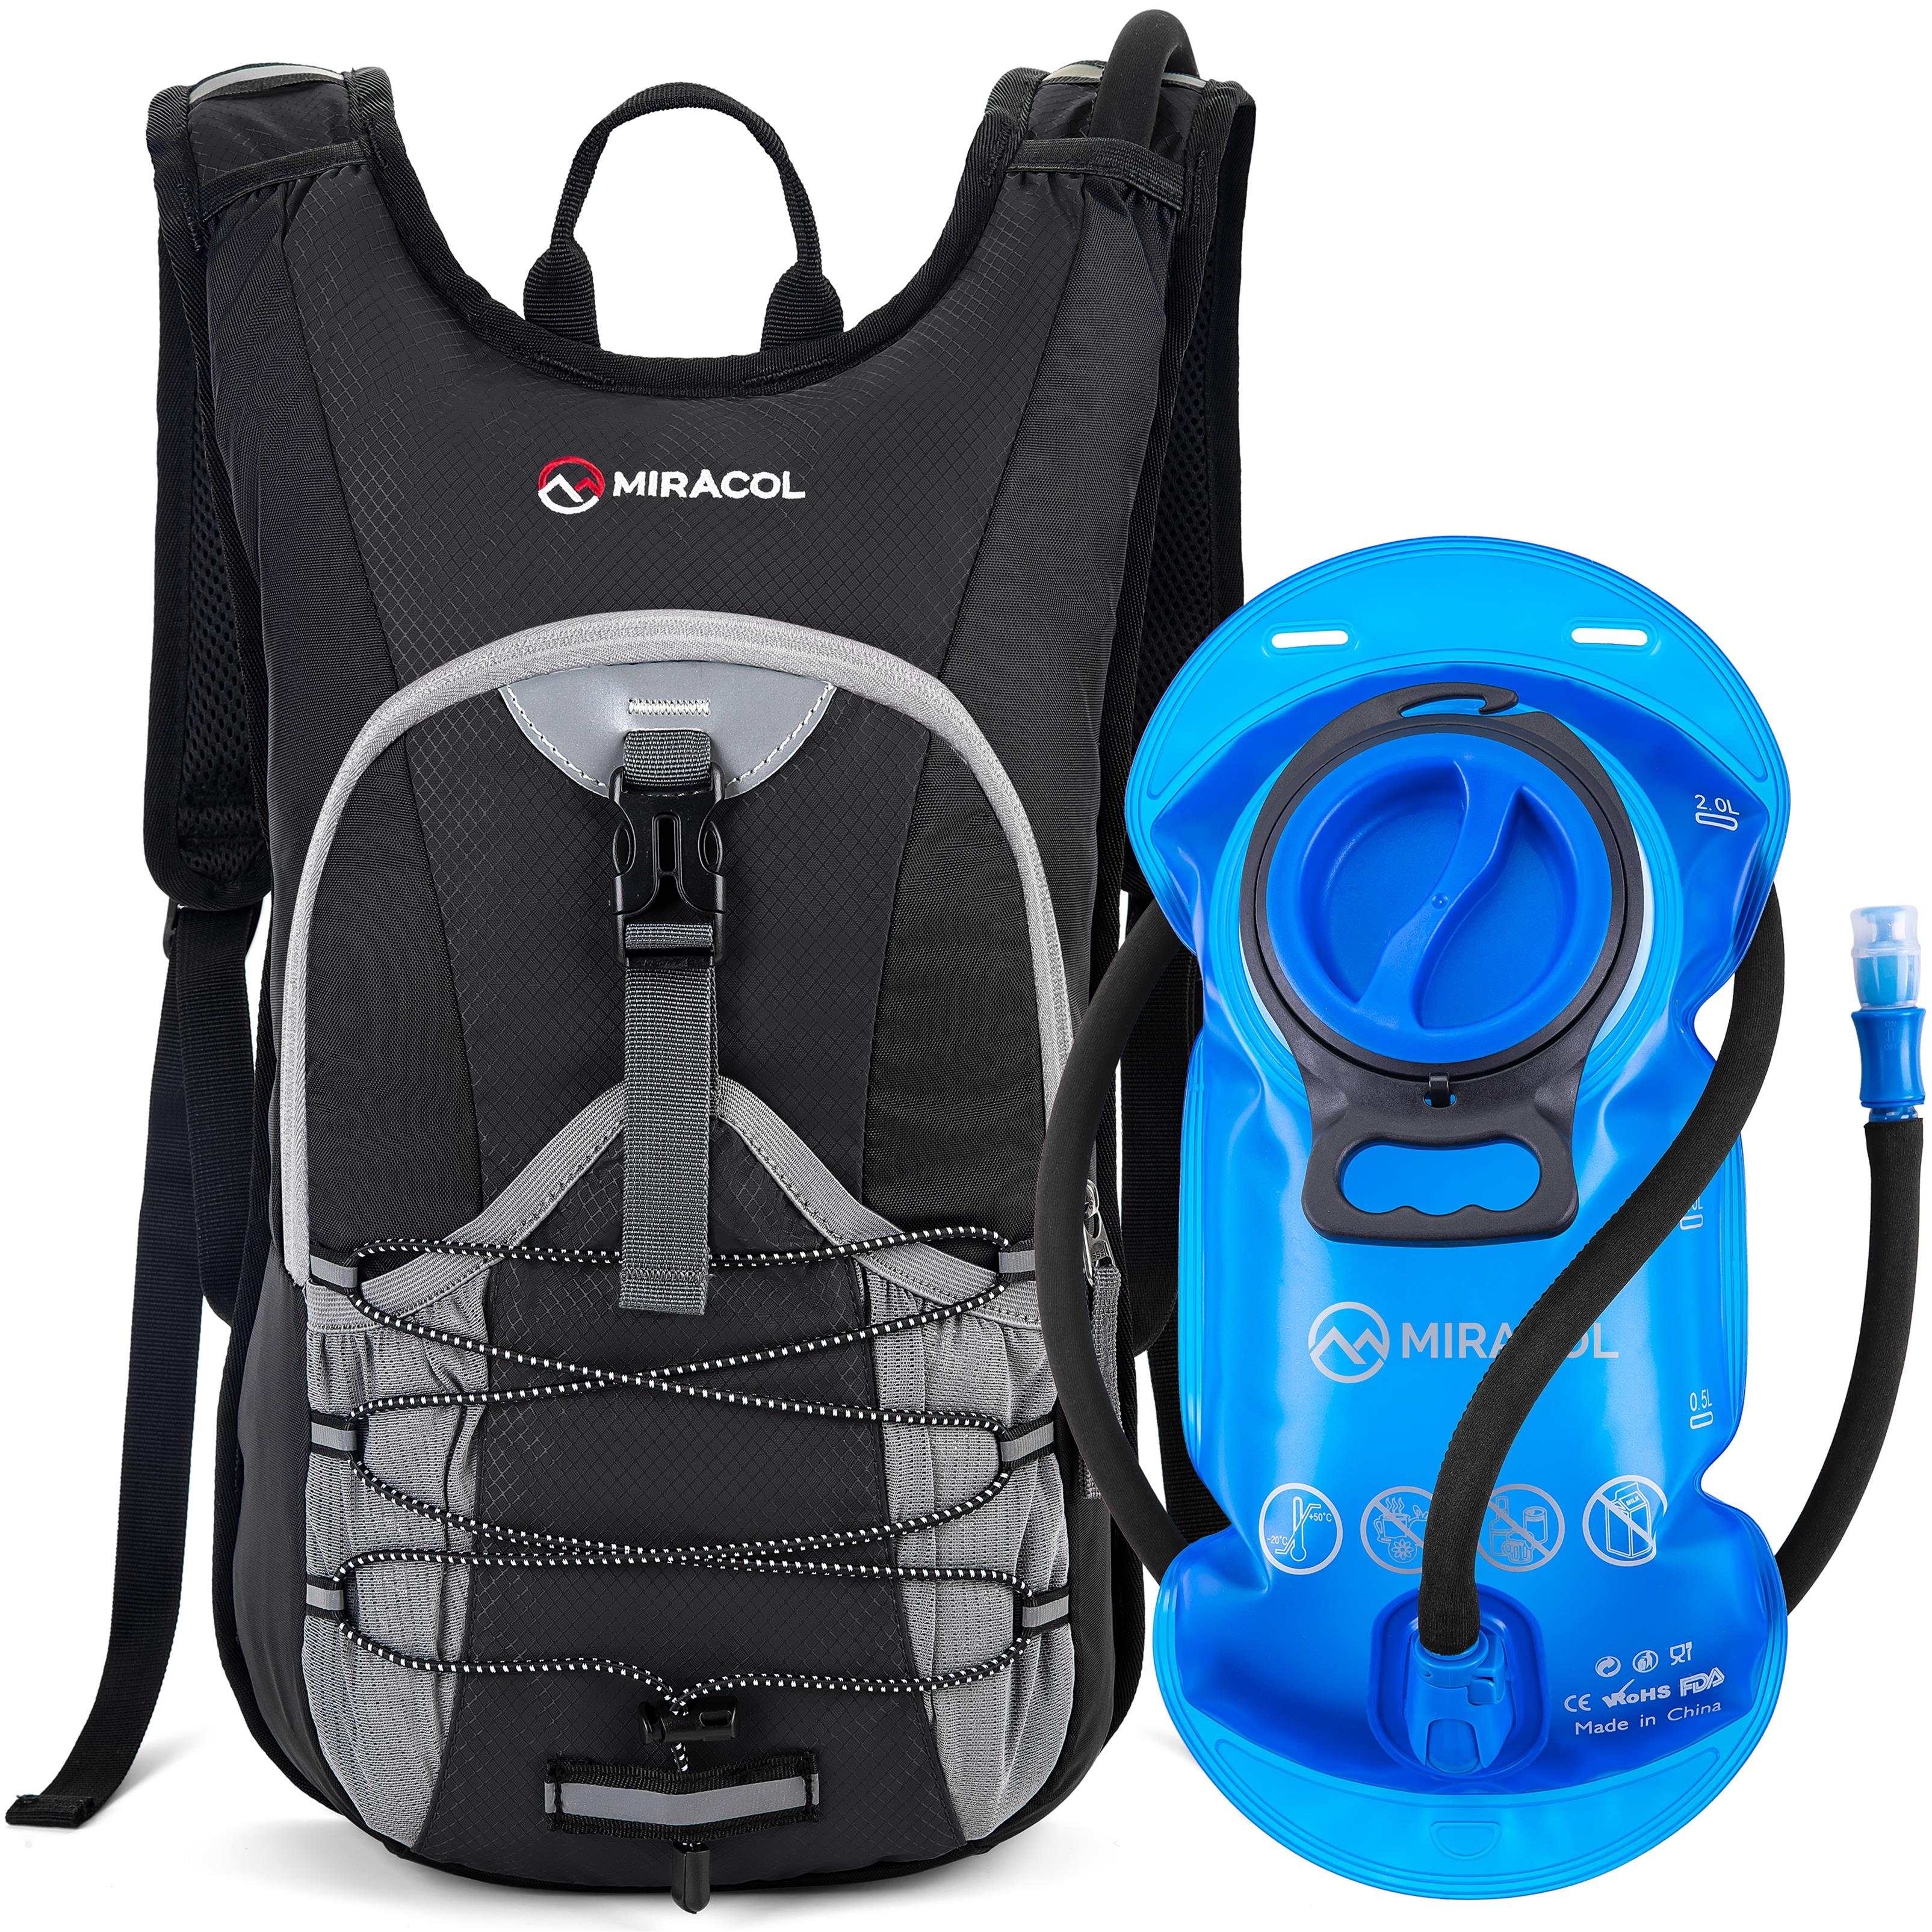 MIRACOL 15L Insulated Hydration Backpack Hydration Pack Lightweigh Hydro Backpack - 0